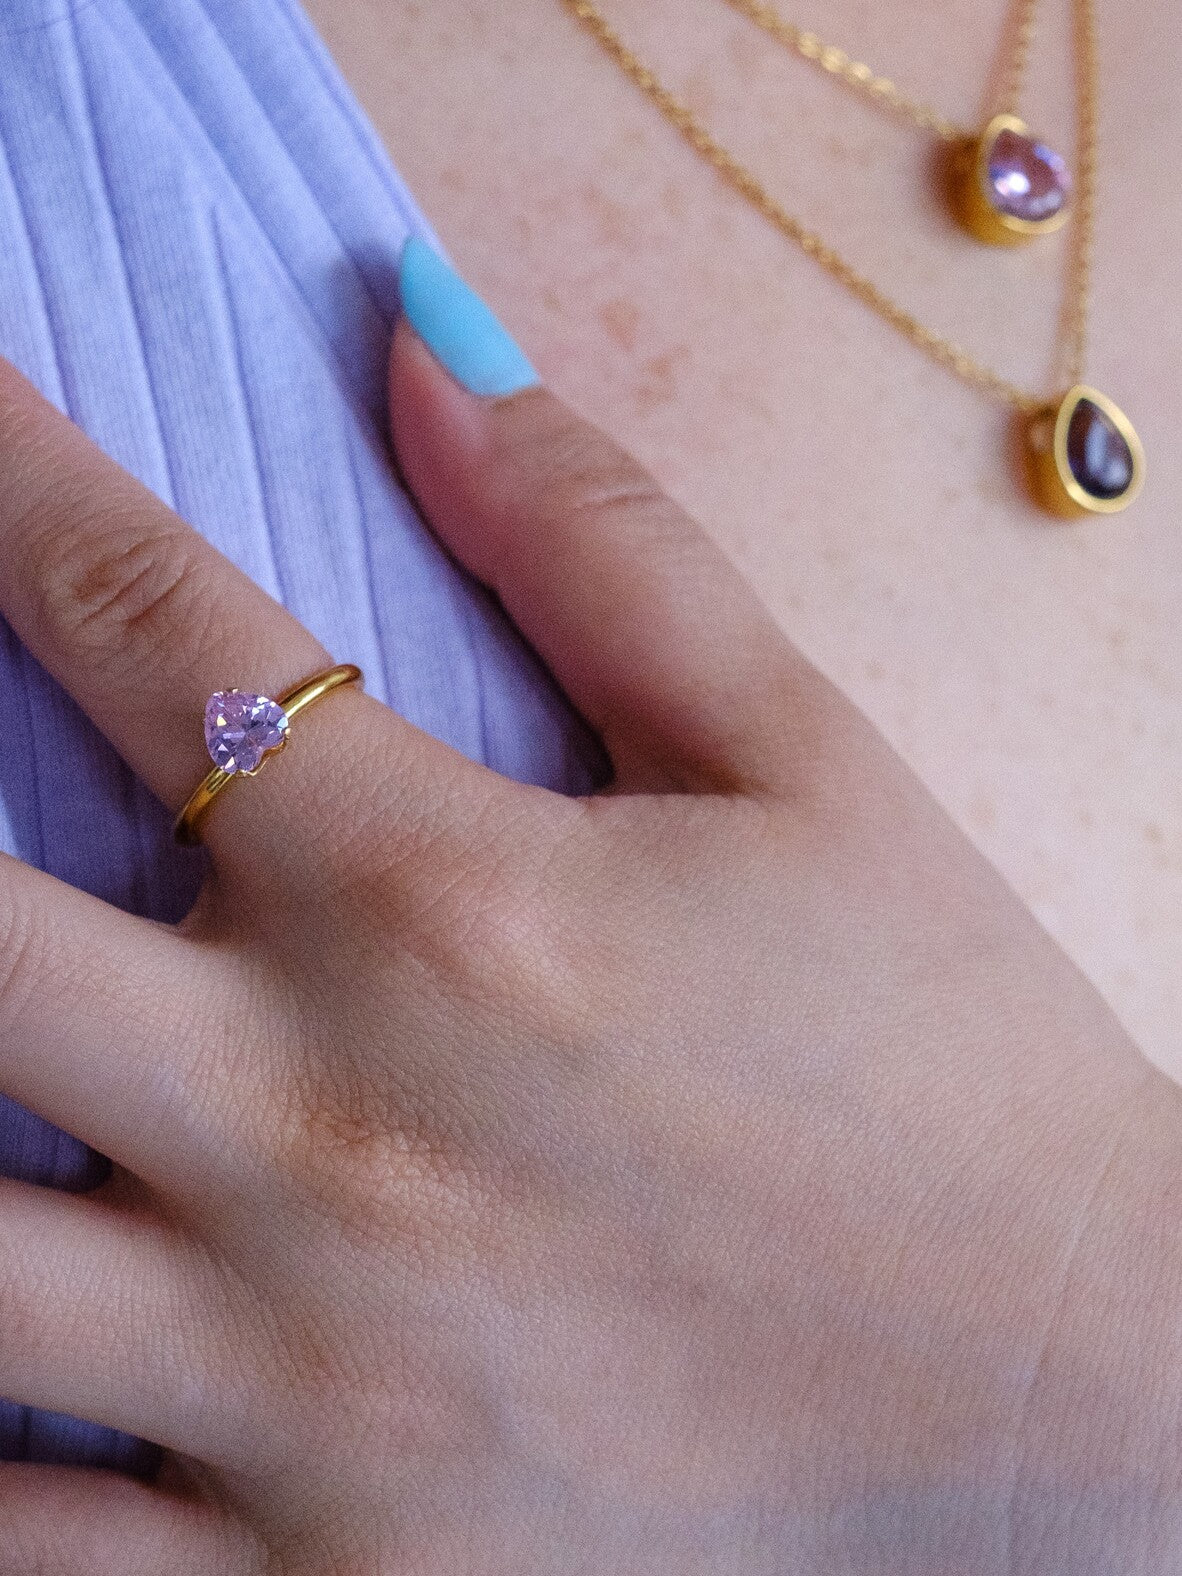 Woman's hand wearing a gold band ring with a pale pink heart gem stone. The woman also wears two gold necklaces with tear drop pendants with a pink and a purple gem